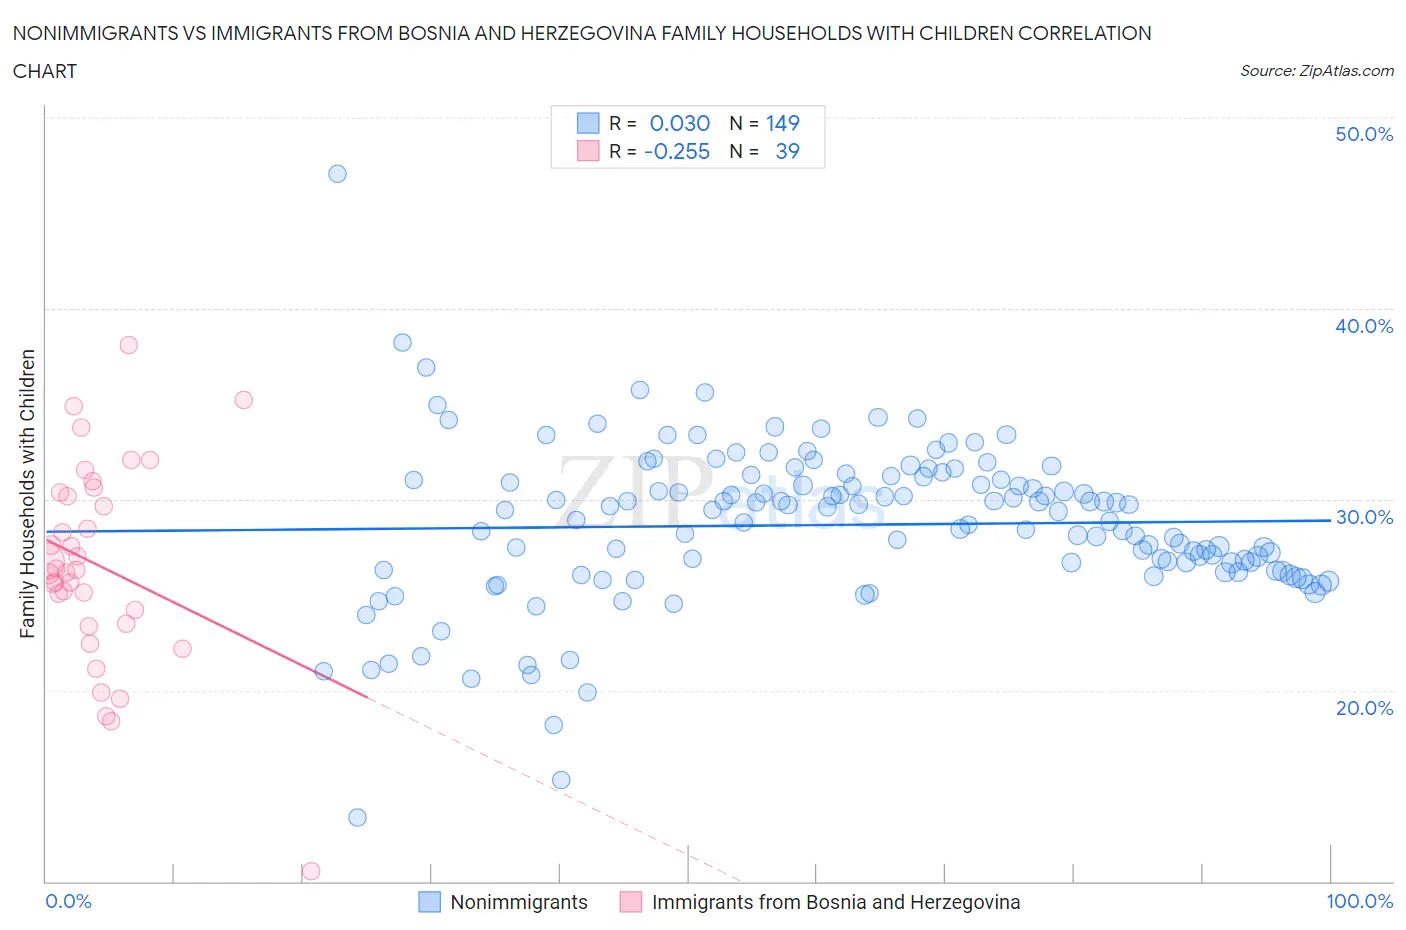 Nonimmigrants vs Immigrants from Bosnia and Herzegovina Family Households with Children